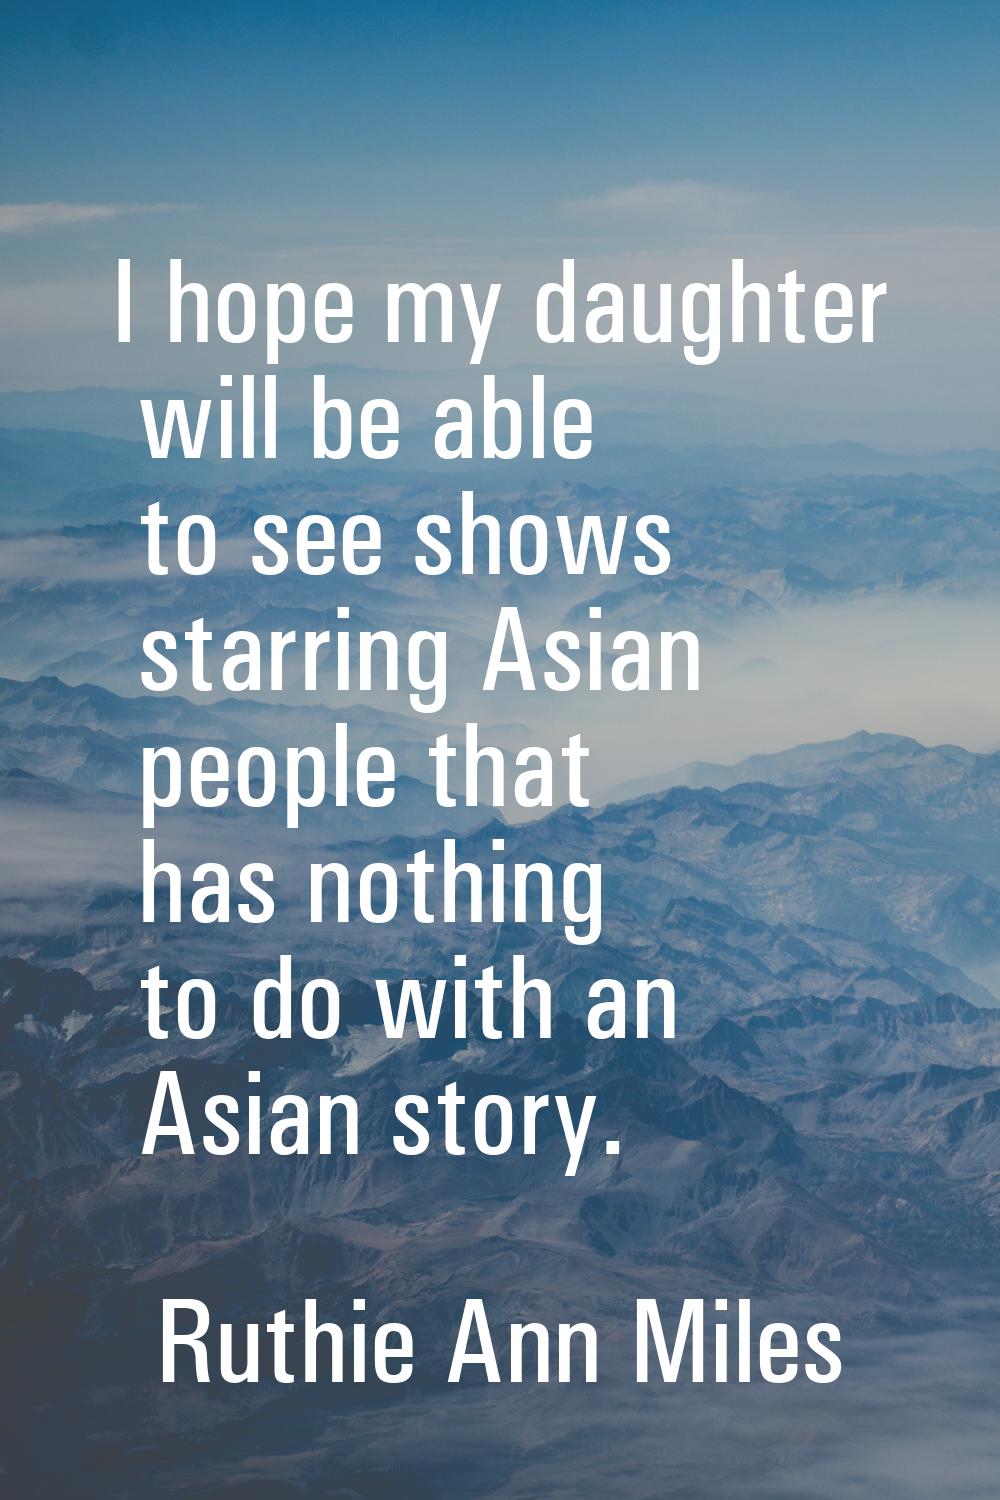 I hope my daughter will be able to see shows starring Asian people that has nothing to do with an A